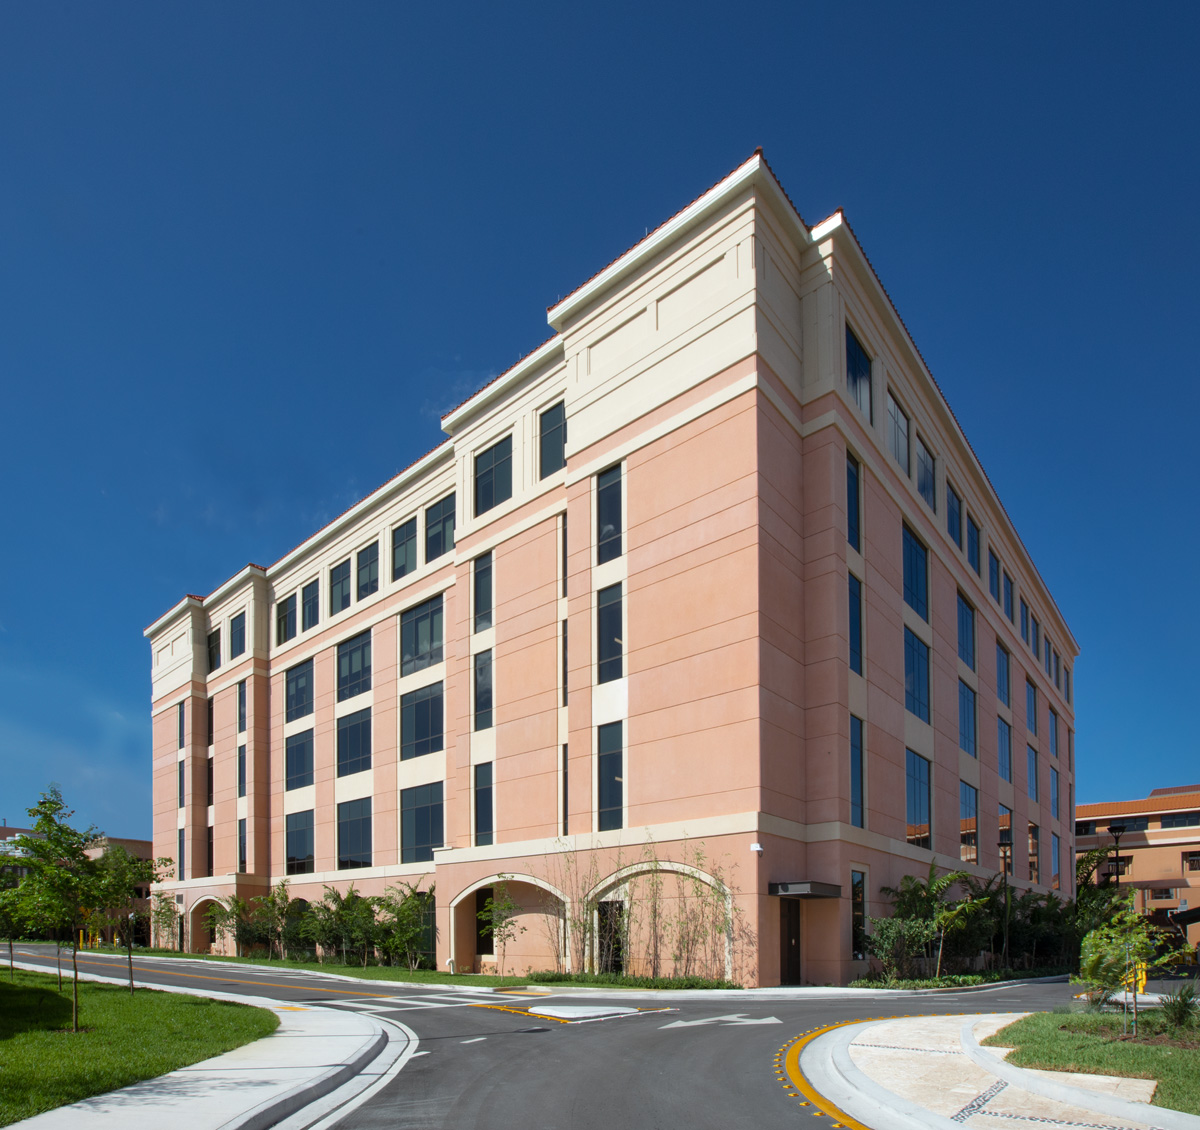 he Baptist East medical bed tower provides expanded bed space for healthcare in Miami.